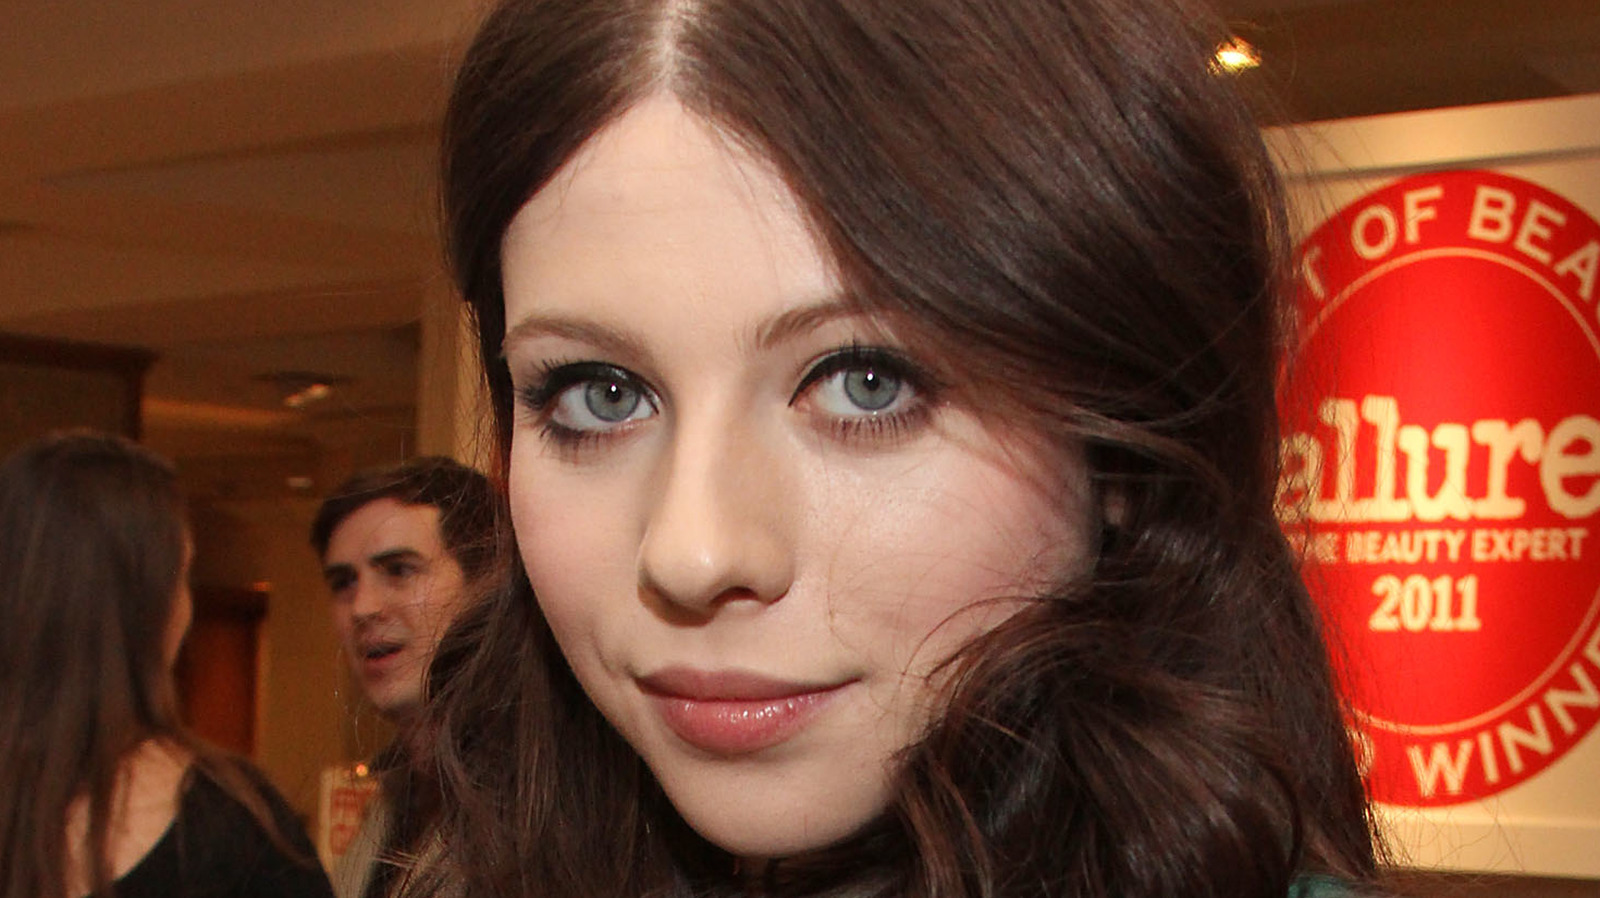 Michelle Trachtenberg Pictures and Photos - Getty Images in 2023